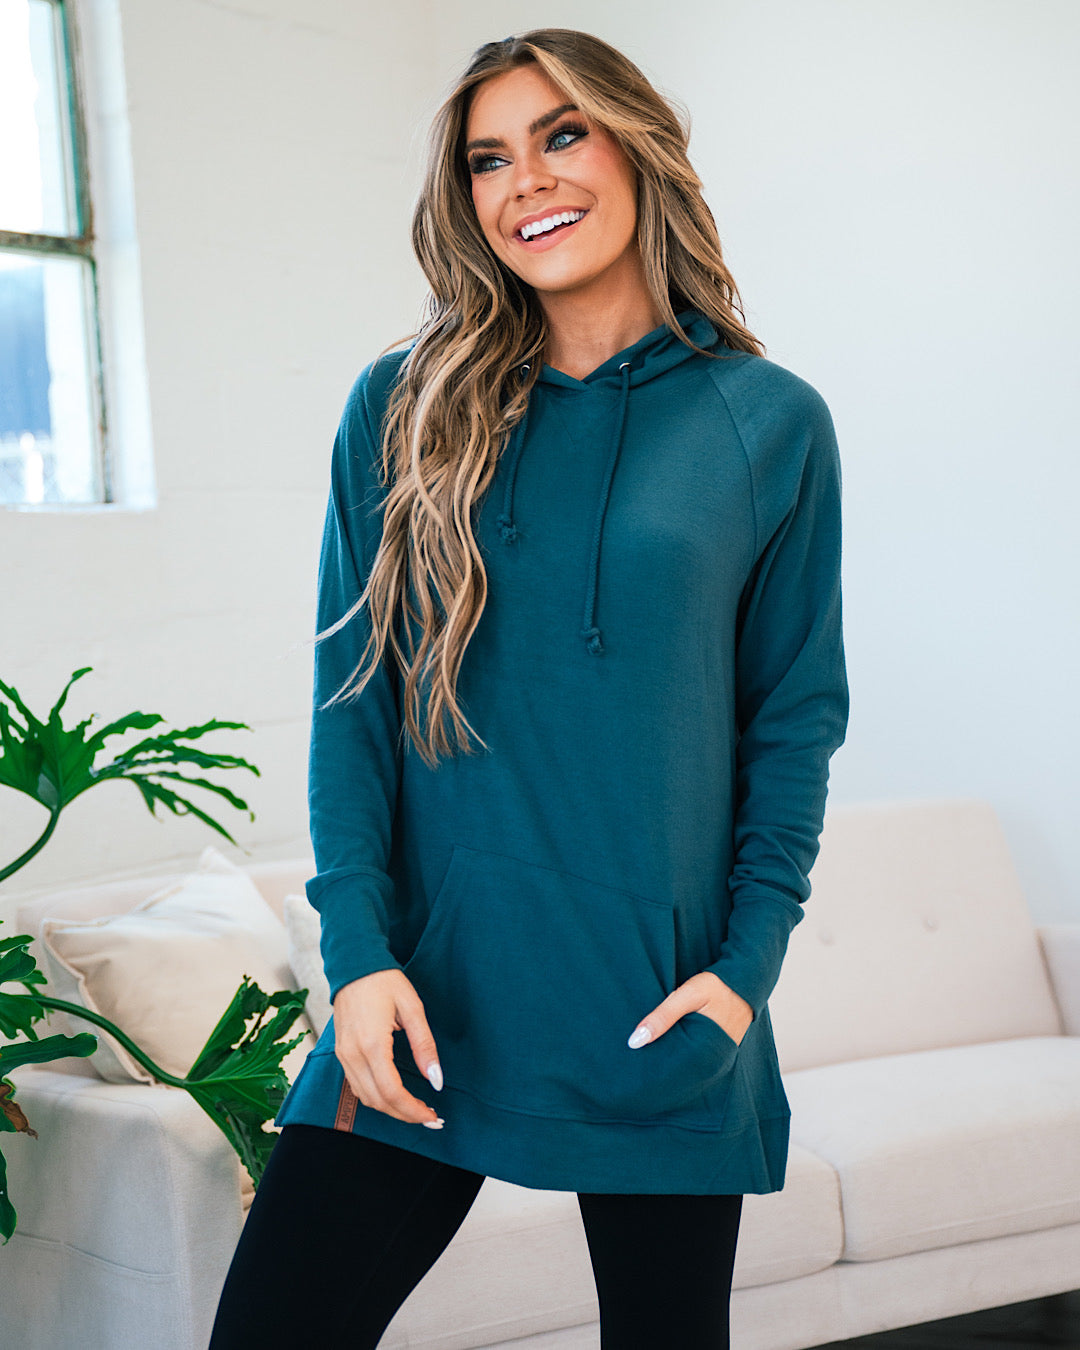 NEW! Ampersand Ave Sideslit Hoodie - Teal  Ampersand Ave   